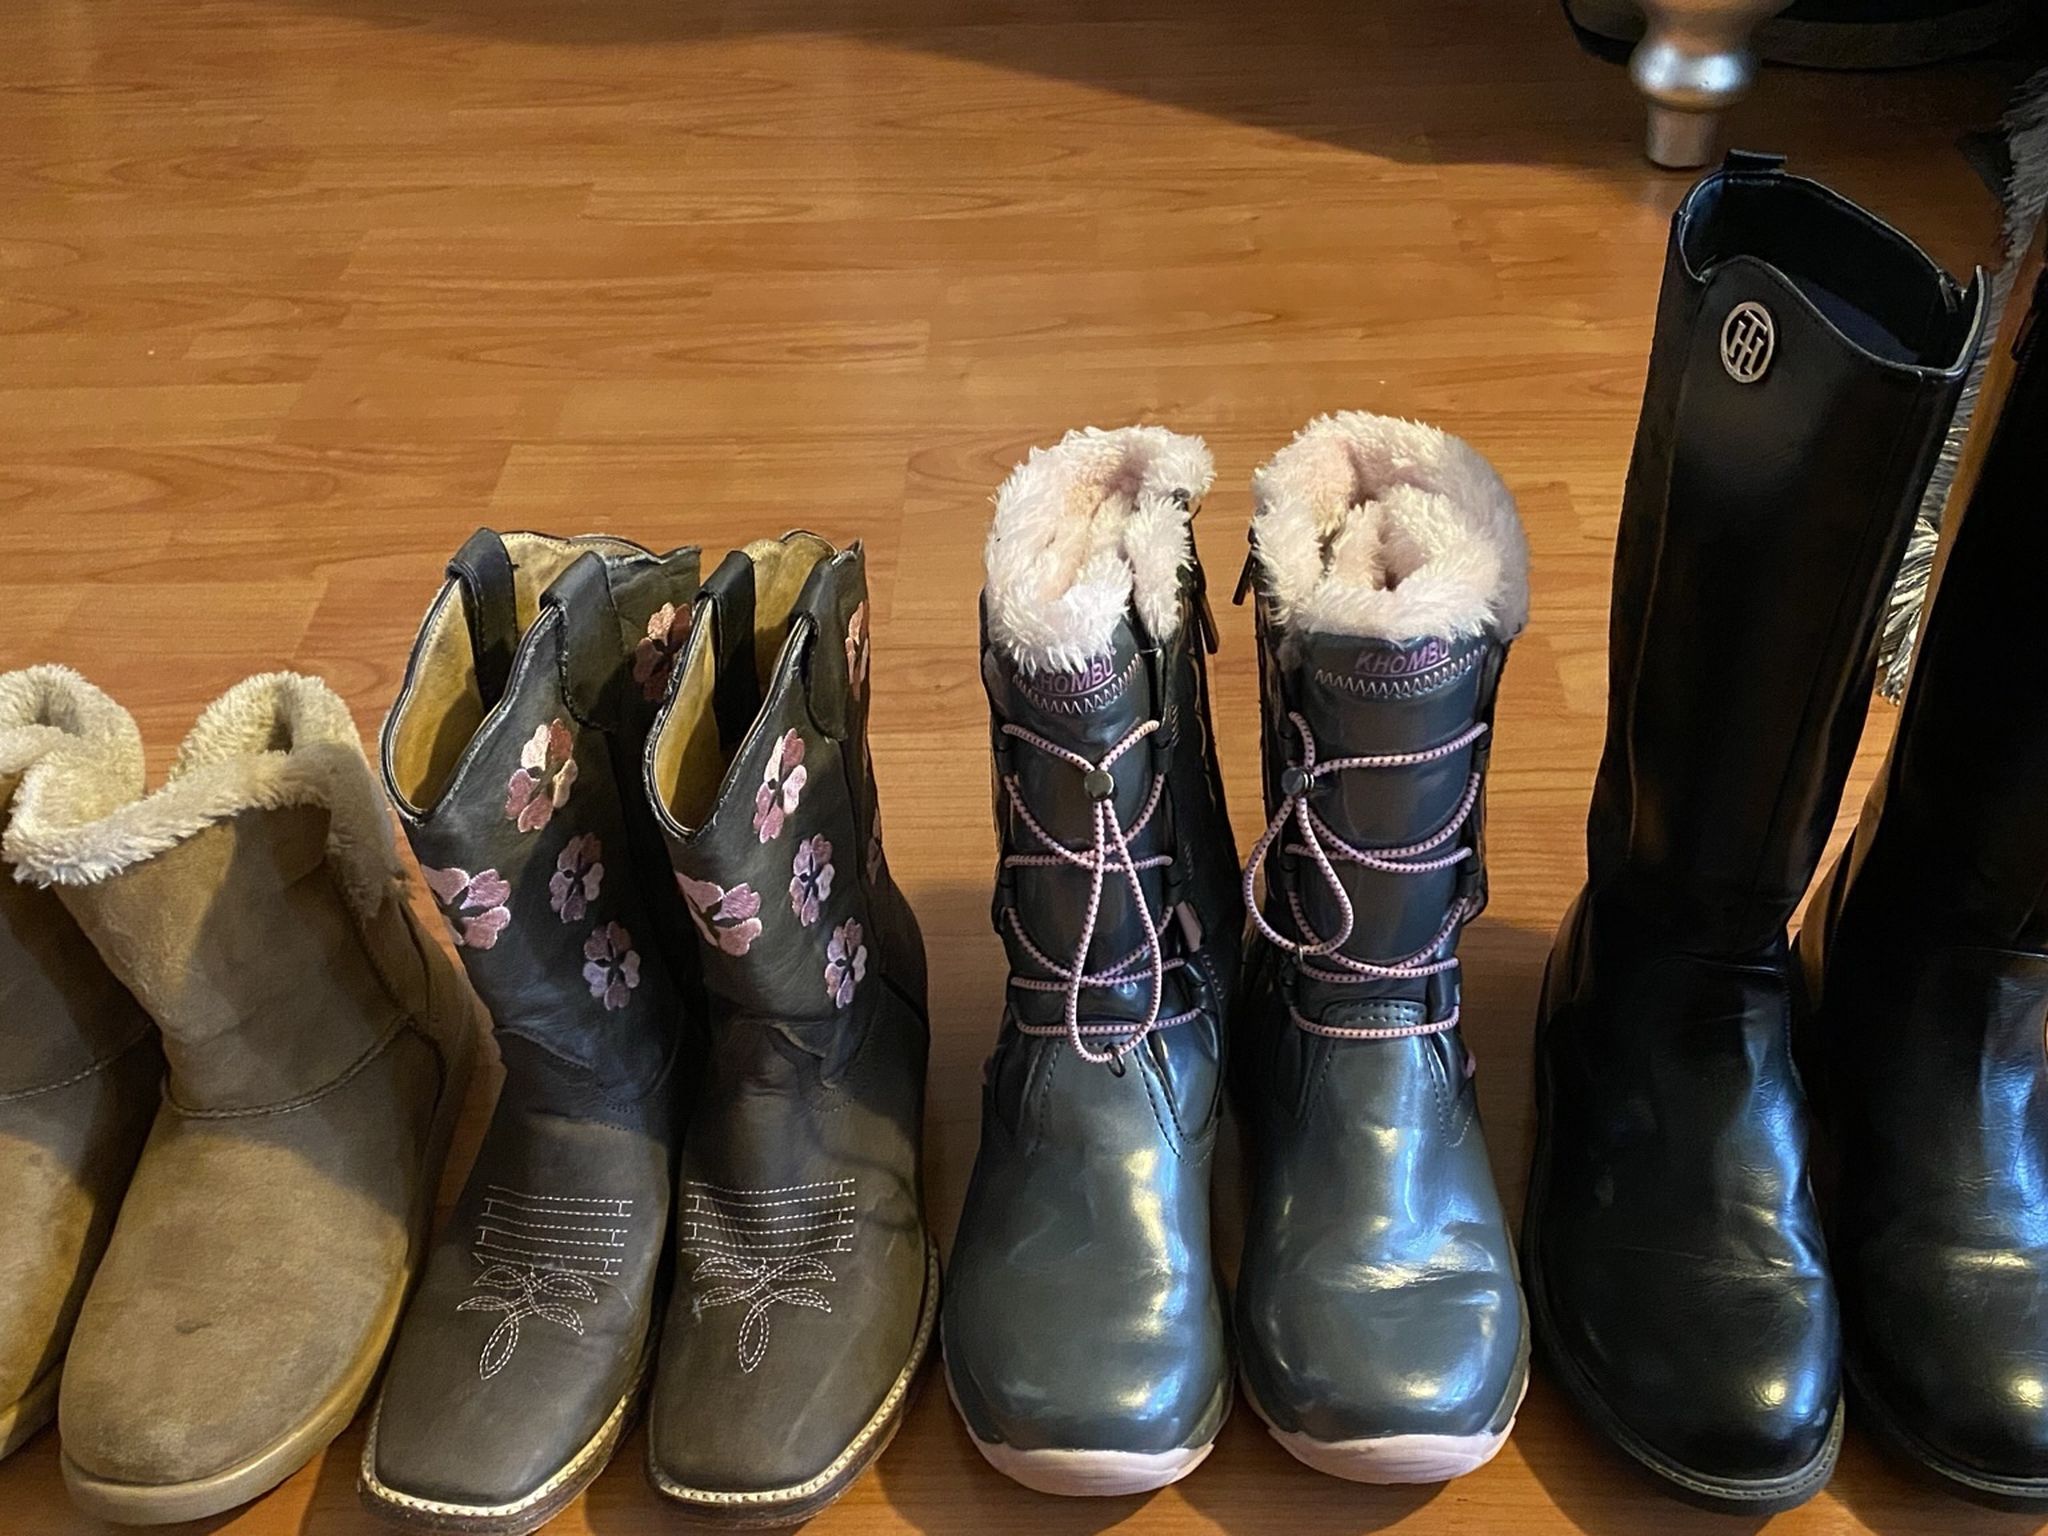 4 Pairs Of Girls Boots